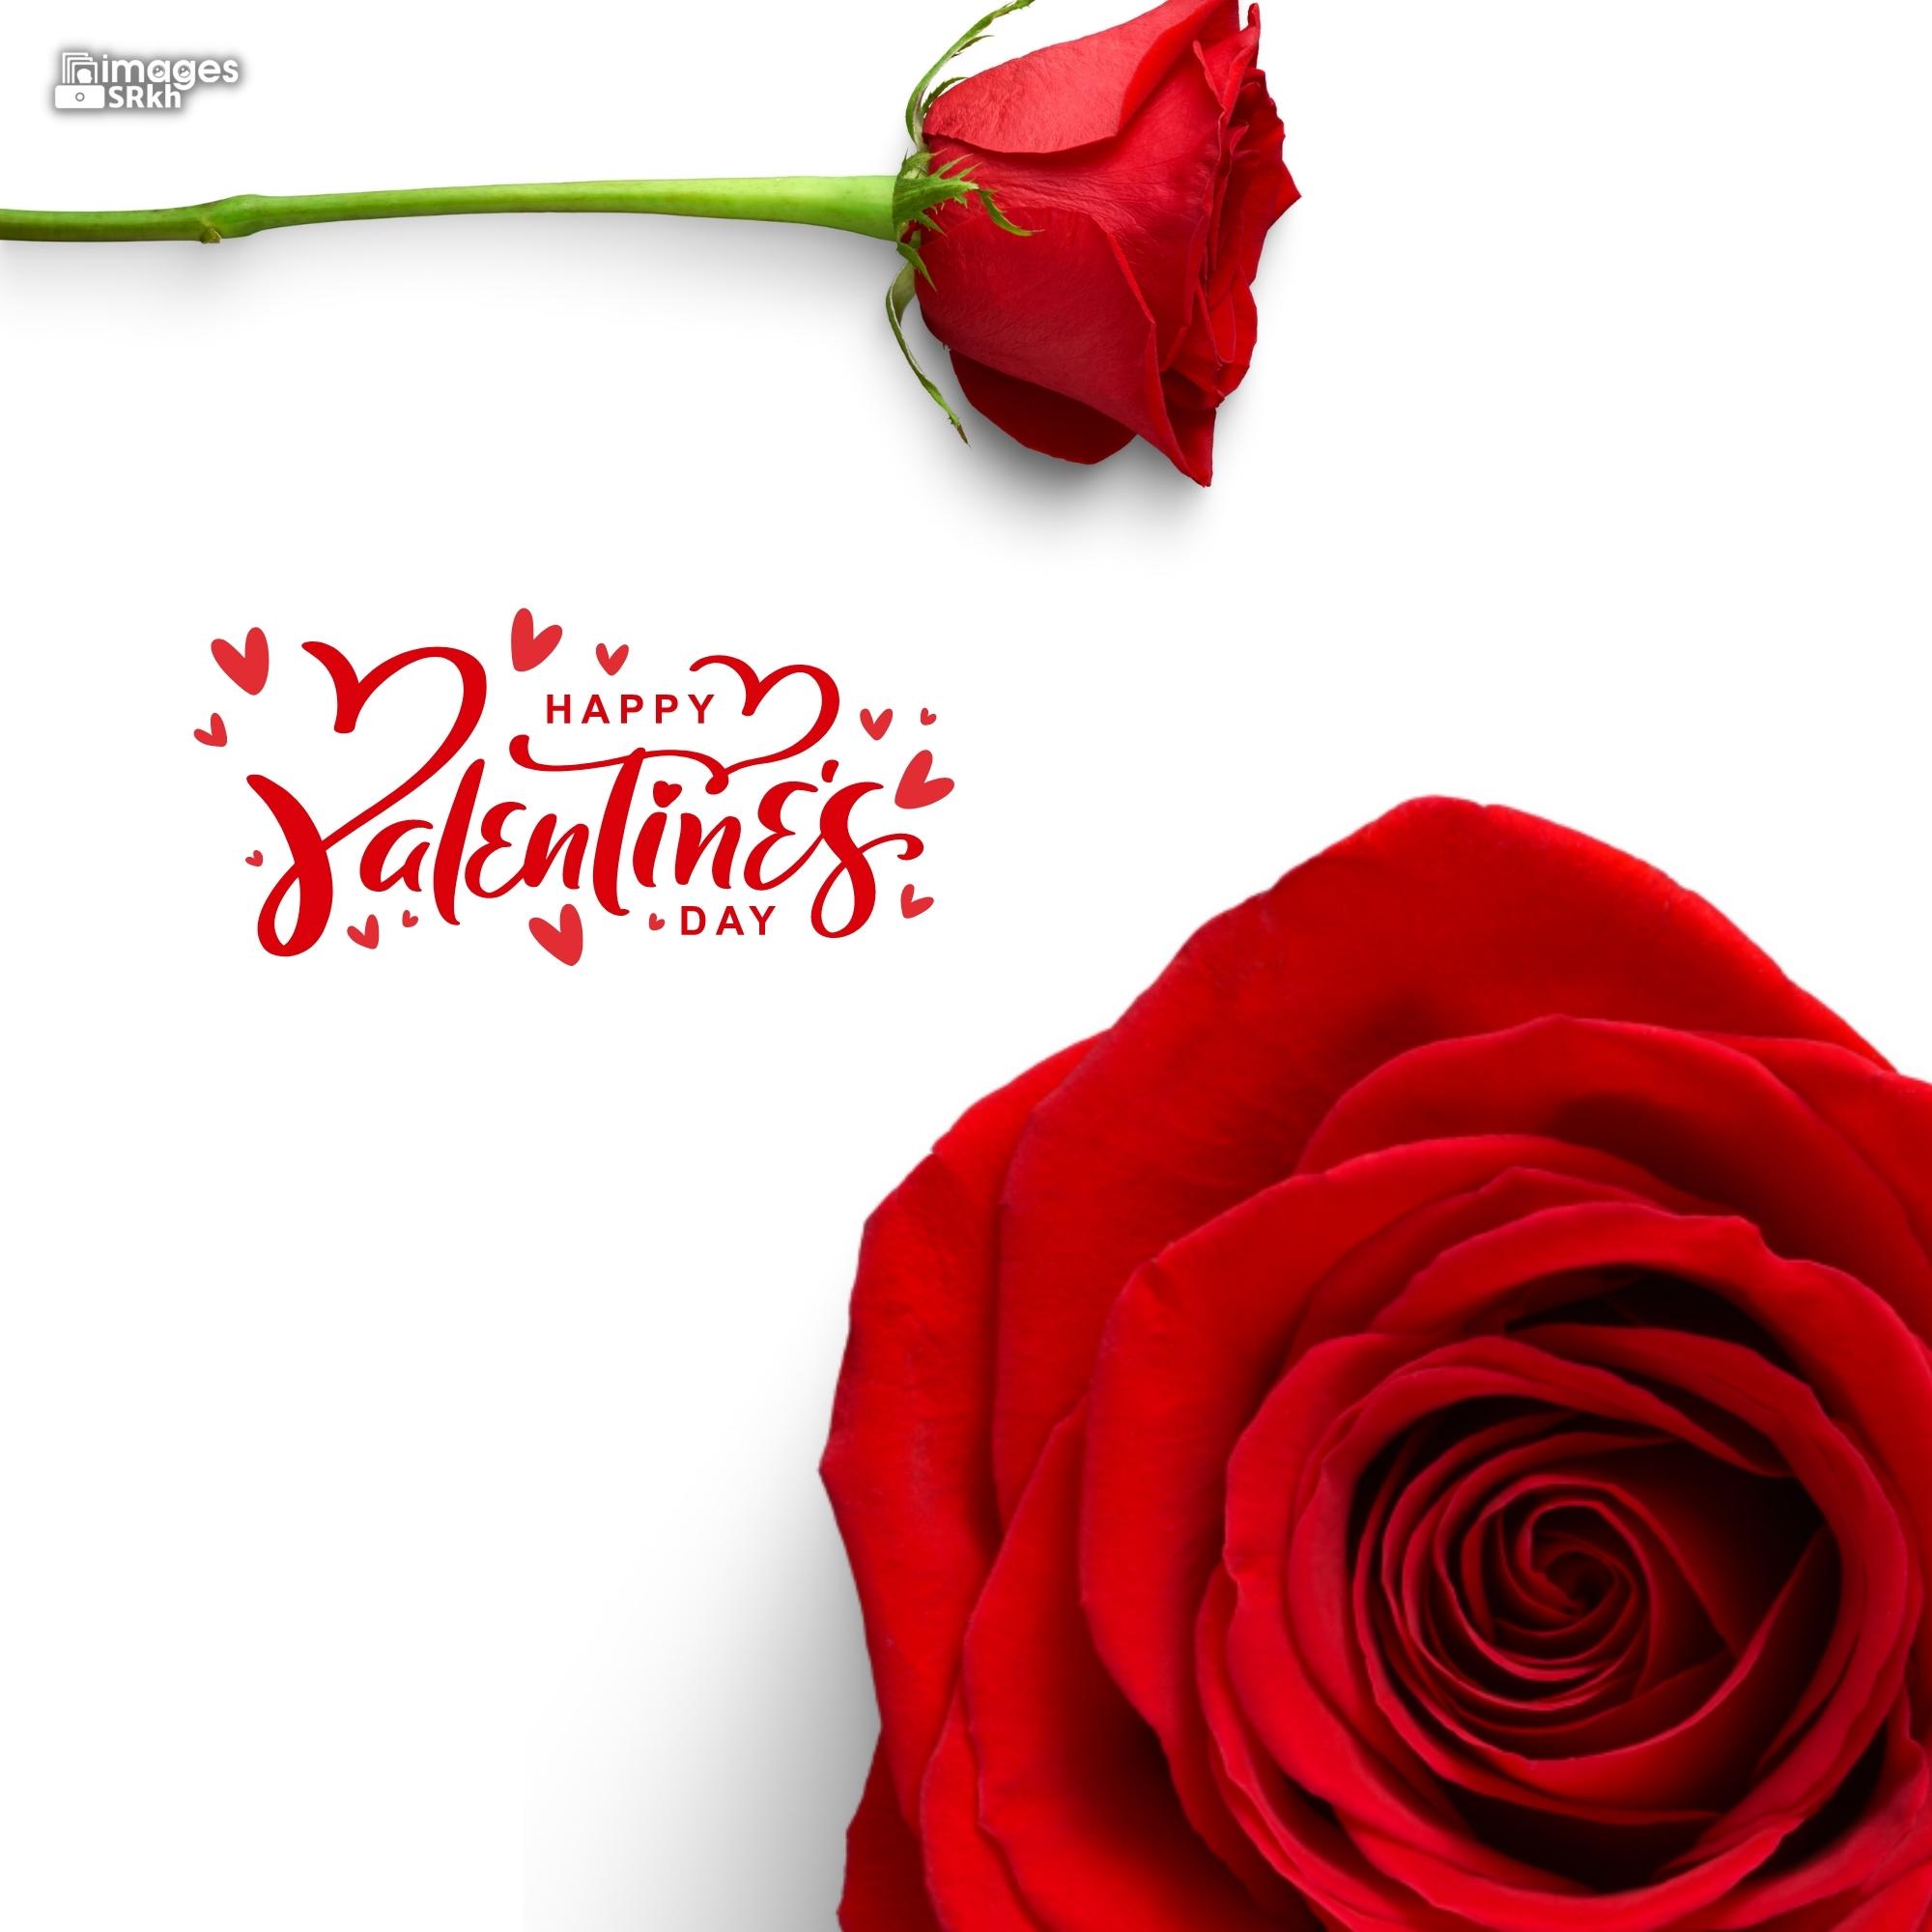 Happy Valentines Day | 429 | PREMIUM IMAGES | Wishes for Love